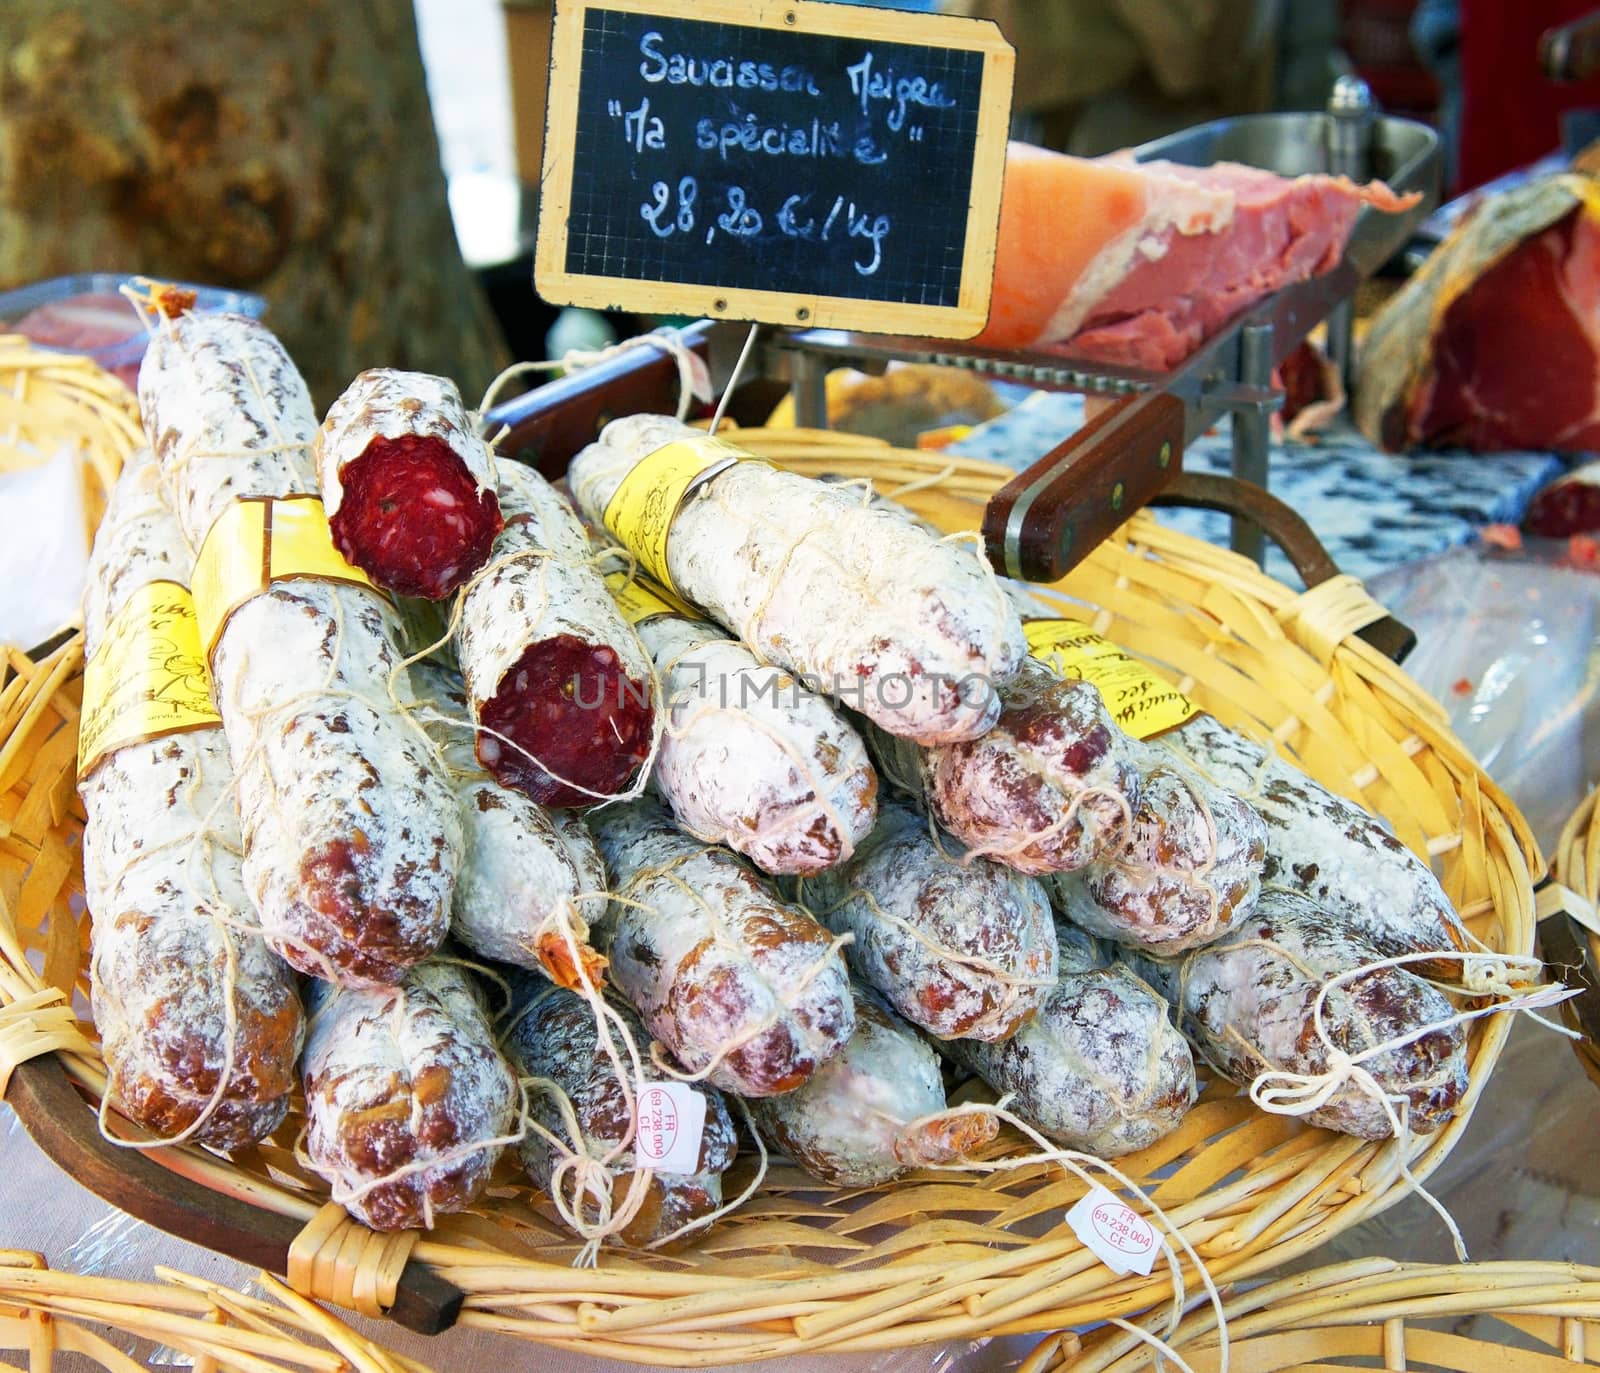 Delicious saucissons (dried sausage) at the outdoor market in Aix-en-Provence, France               